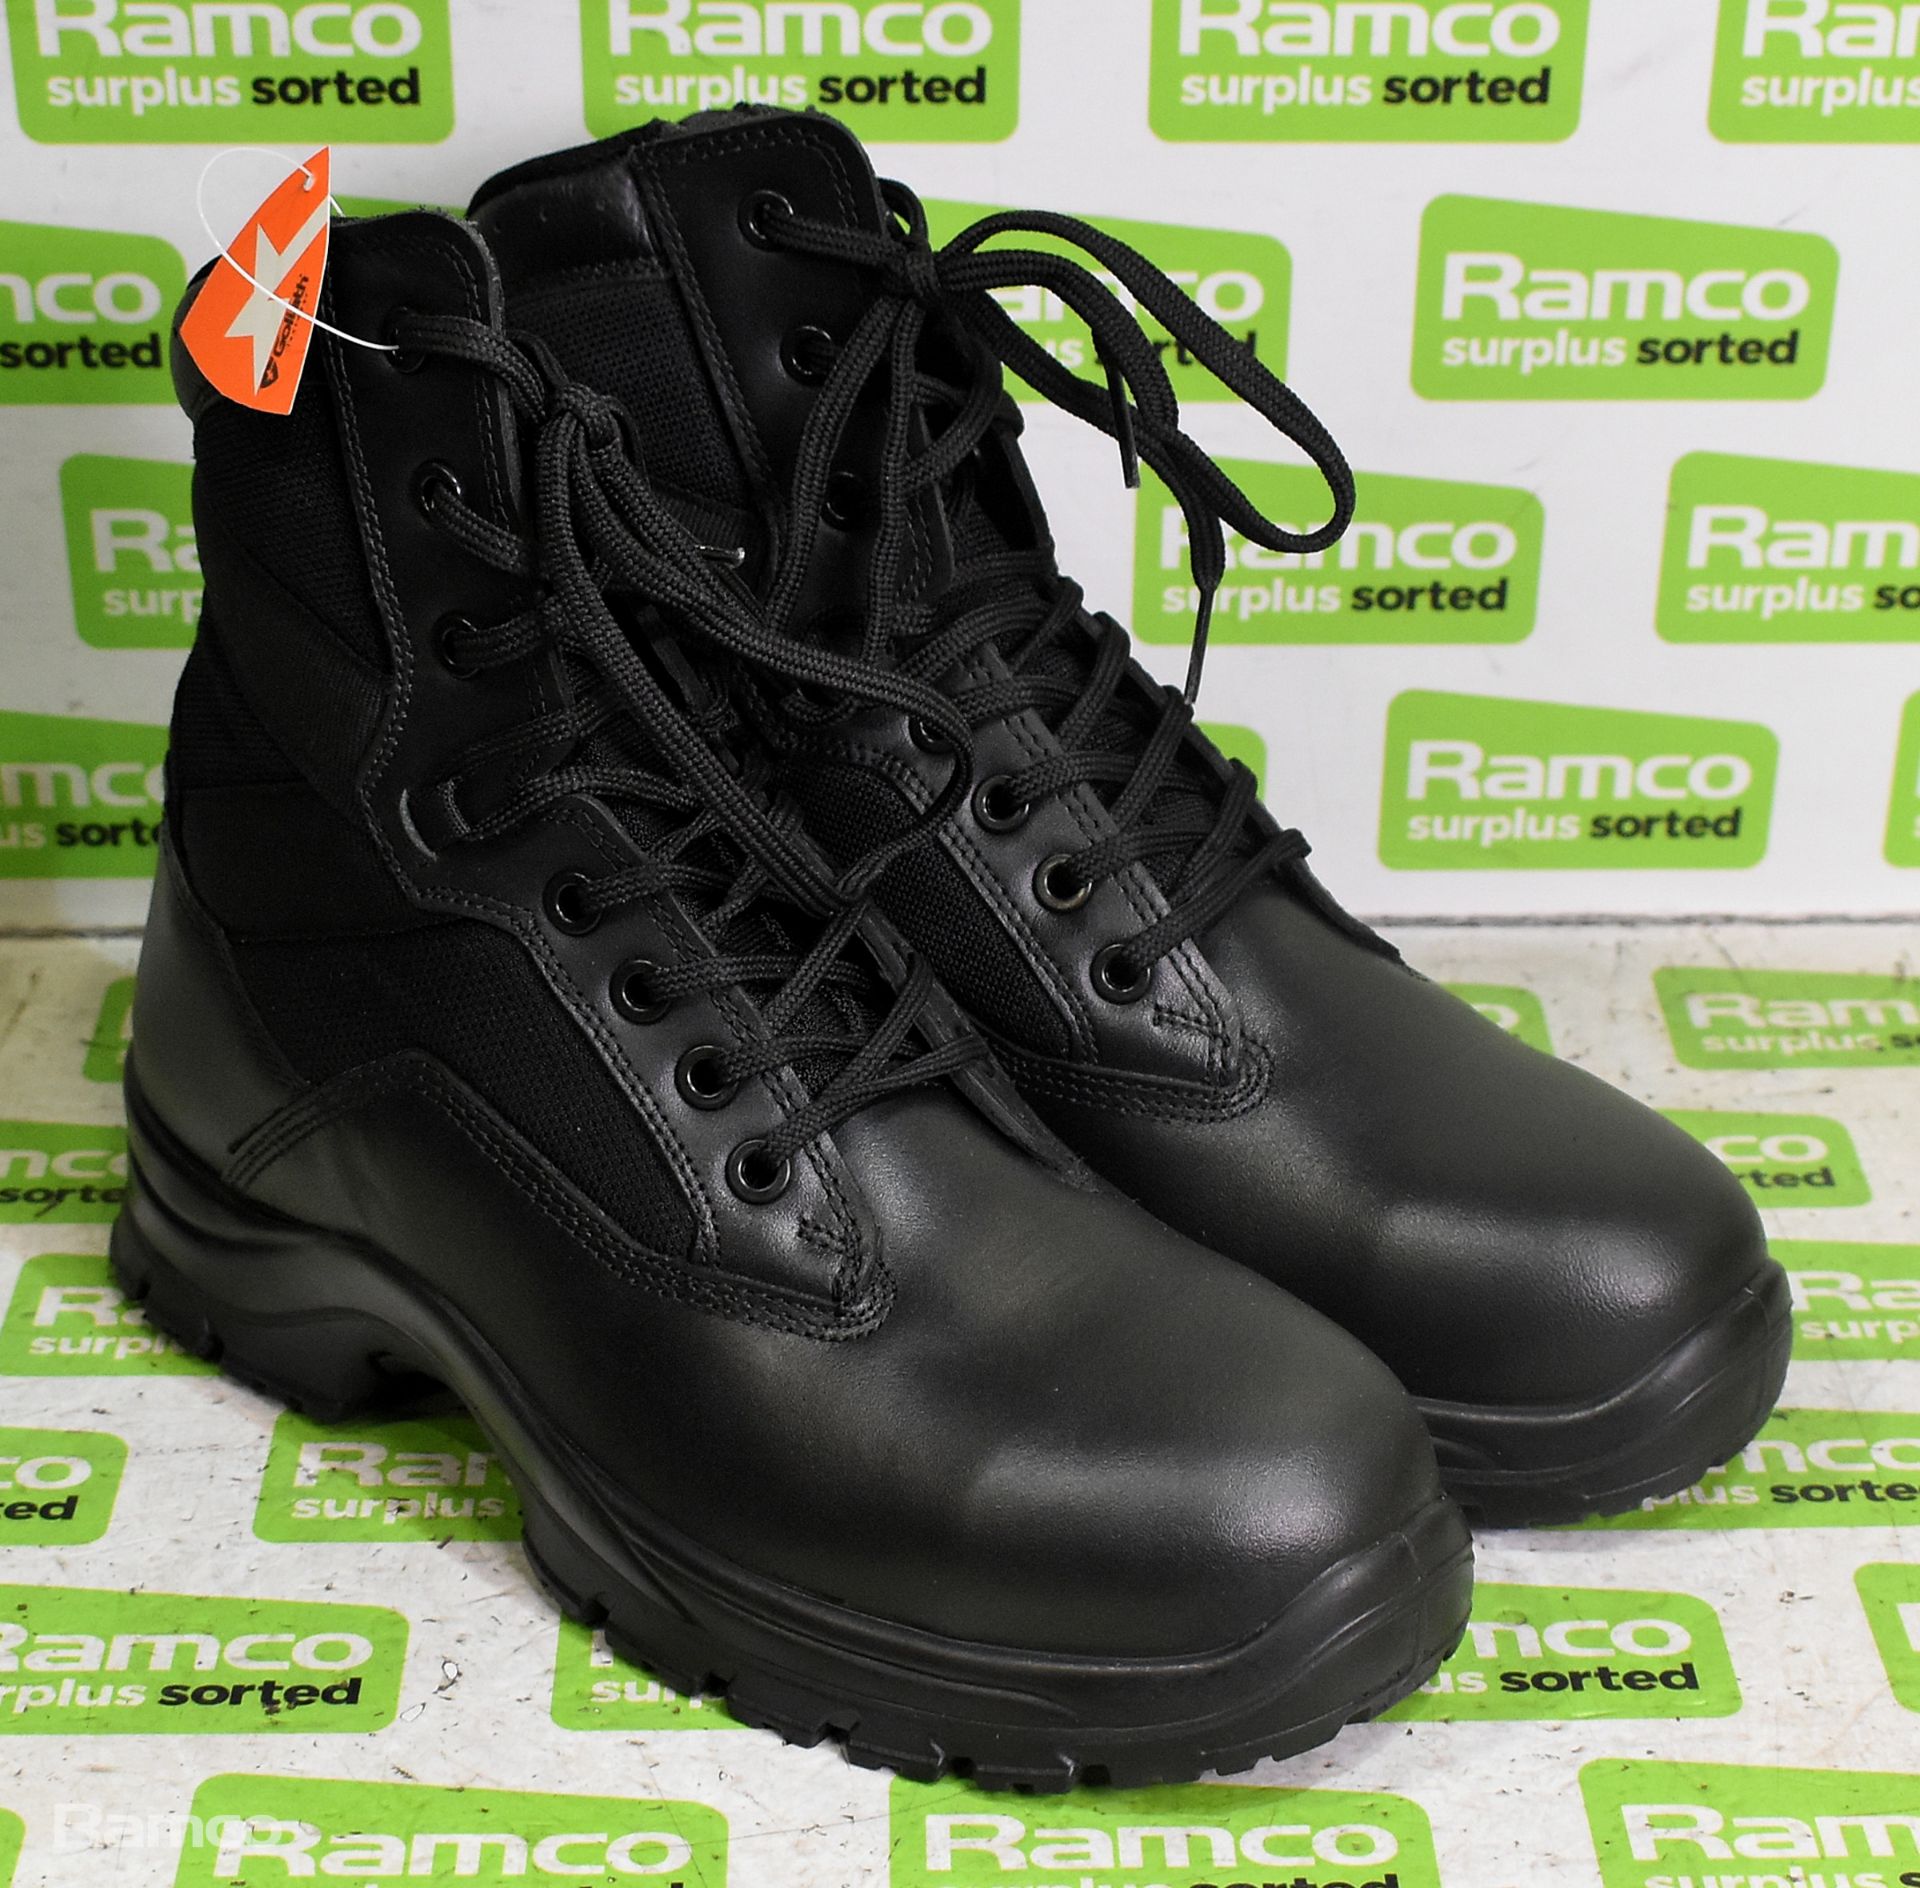 3x pairs of Goliath warm weather boots - Size 9L - Image 2 of 6